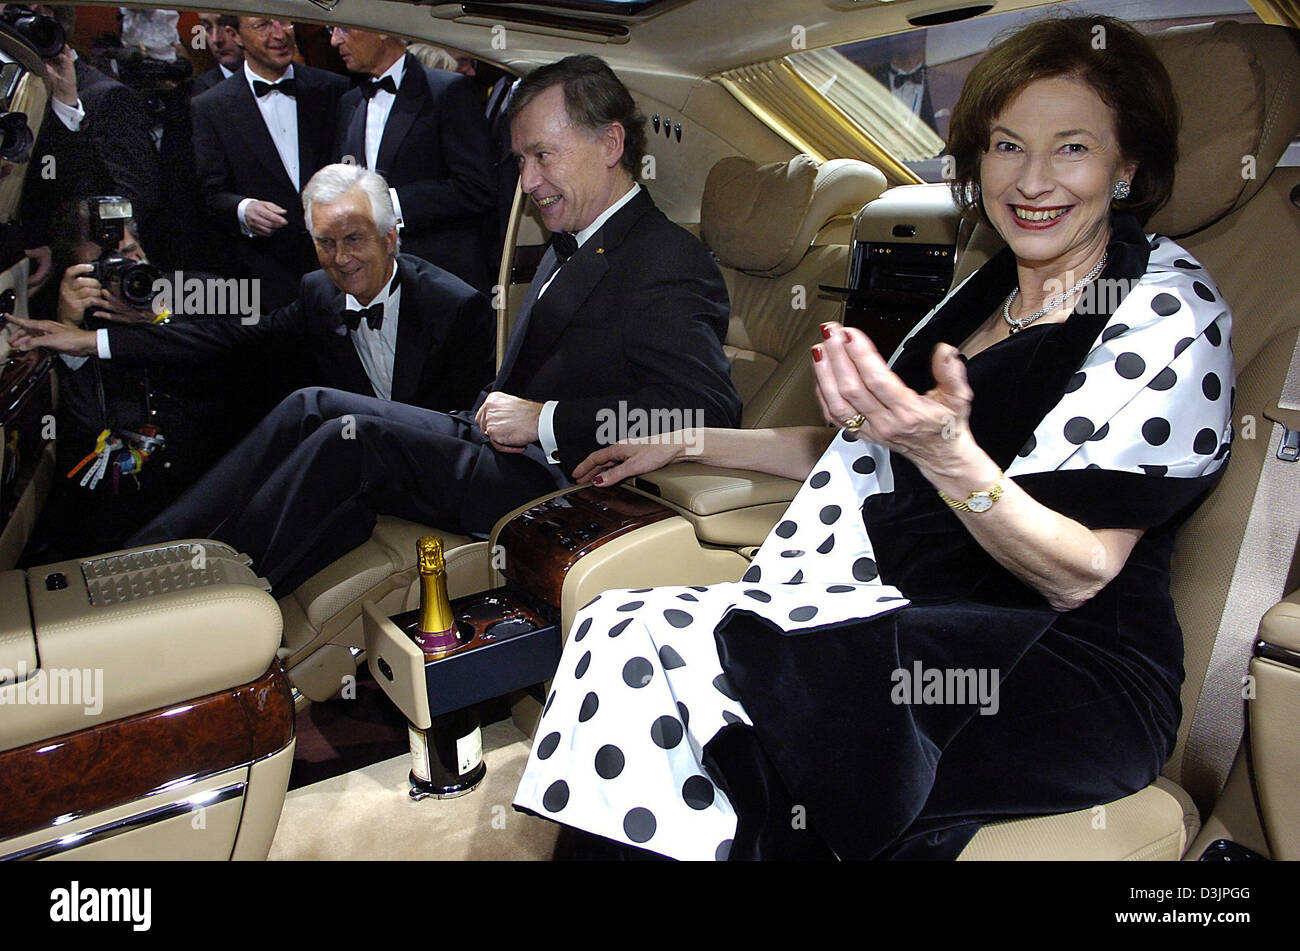 (dpa) - German President Horst Koehler (2nd from R) and his wife Eva (R) sit in the back of a Maybach limousine as they arrive for the 'Ball of Sports' charity ball at the festival hall in Frankfurt, Germany, 05 February 2005. 2,200 guests, among those 400 former and current top athletes as well as celebrities from the world of politics, business and entertainment attended the even Stock Photo